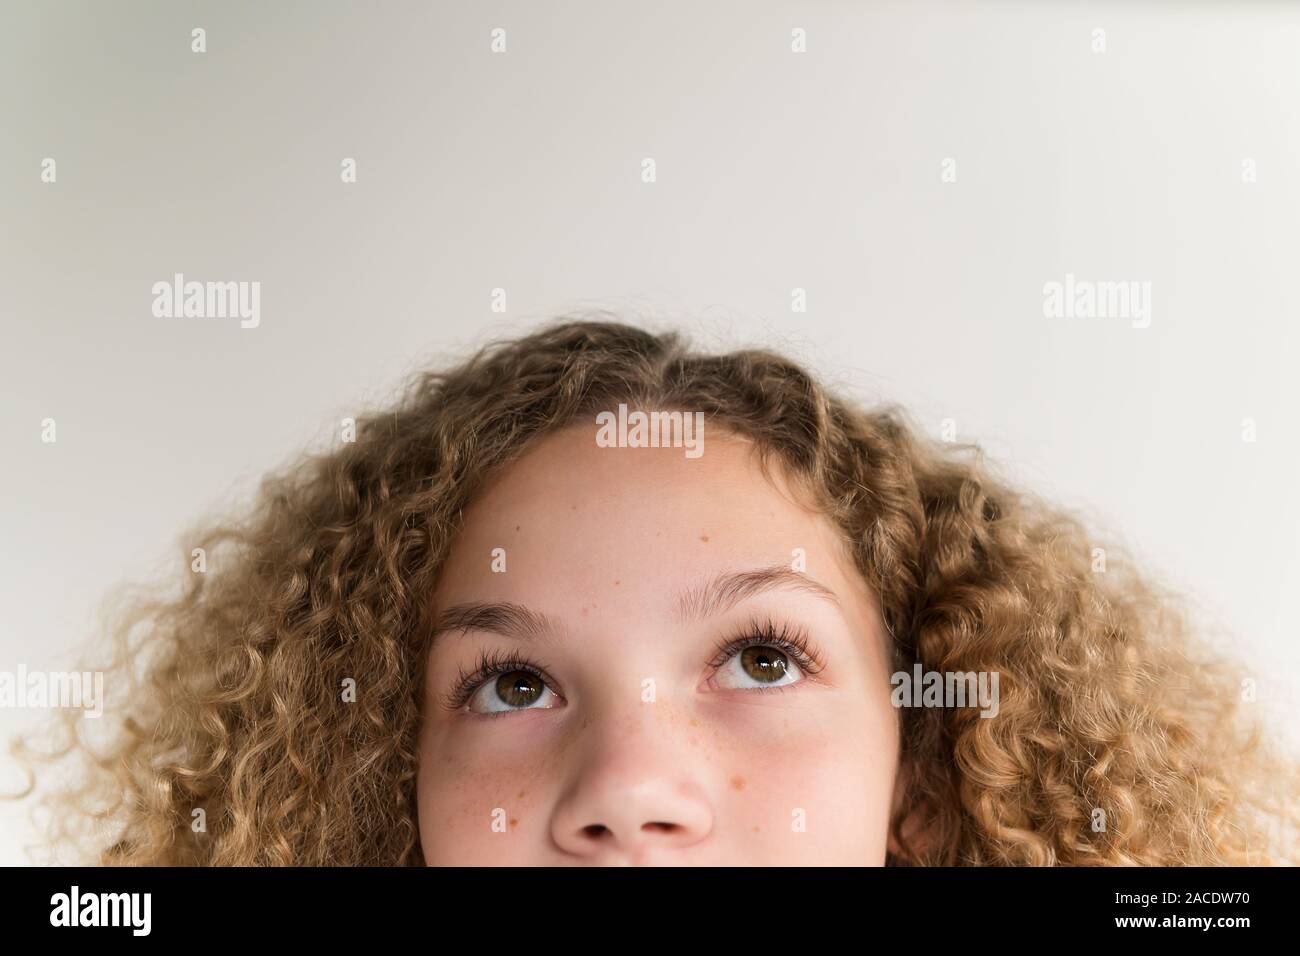 Girl looking up Stock Photo